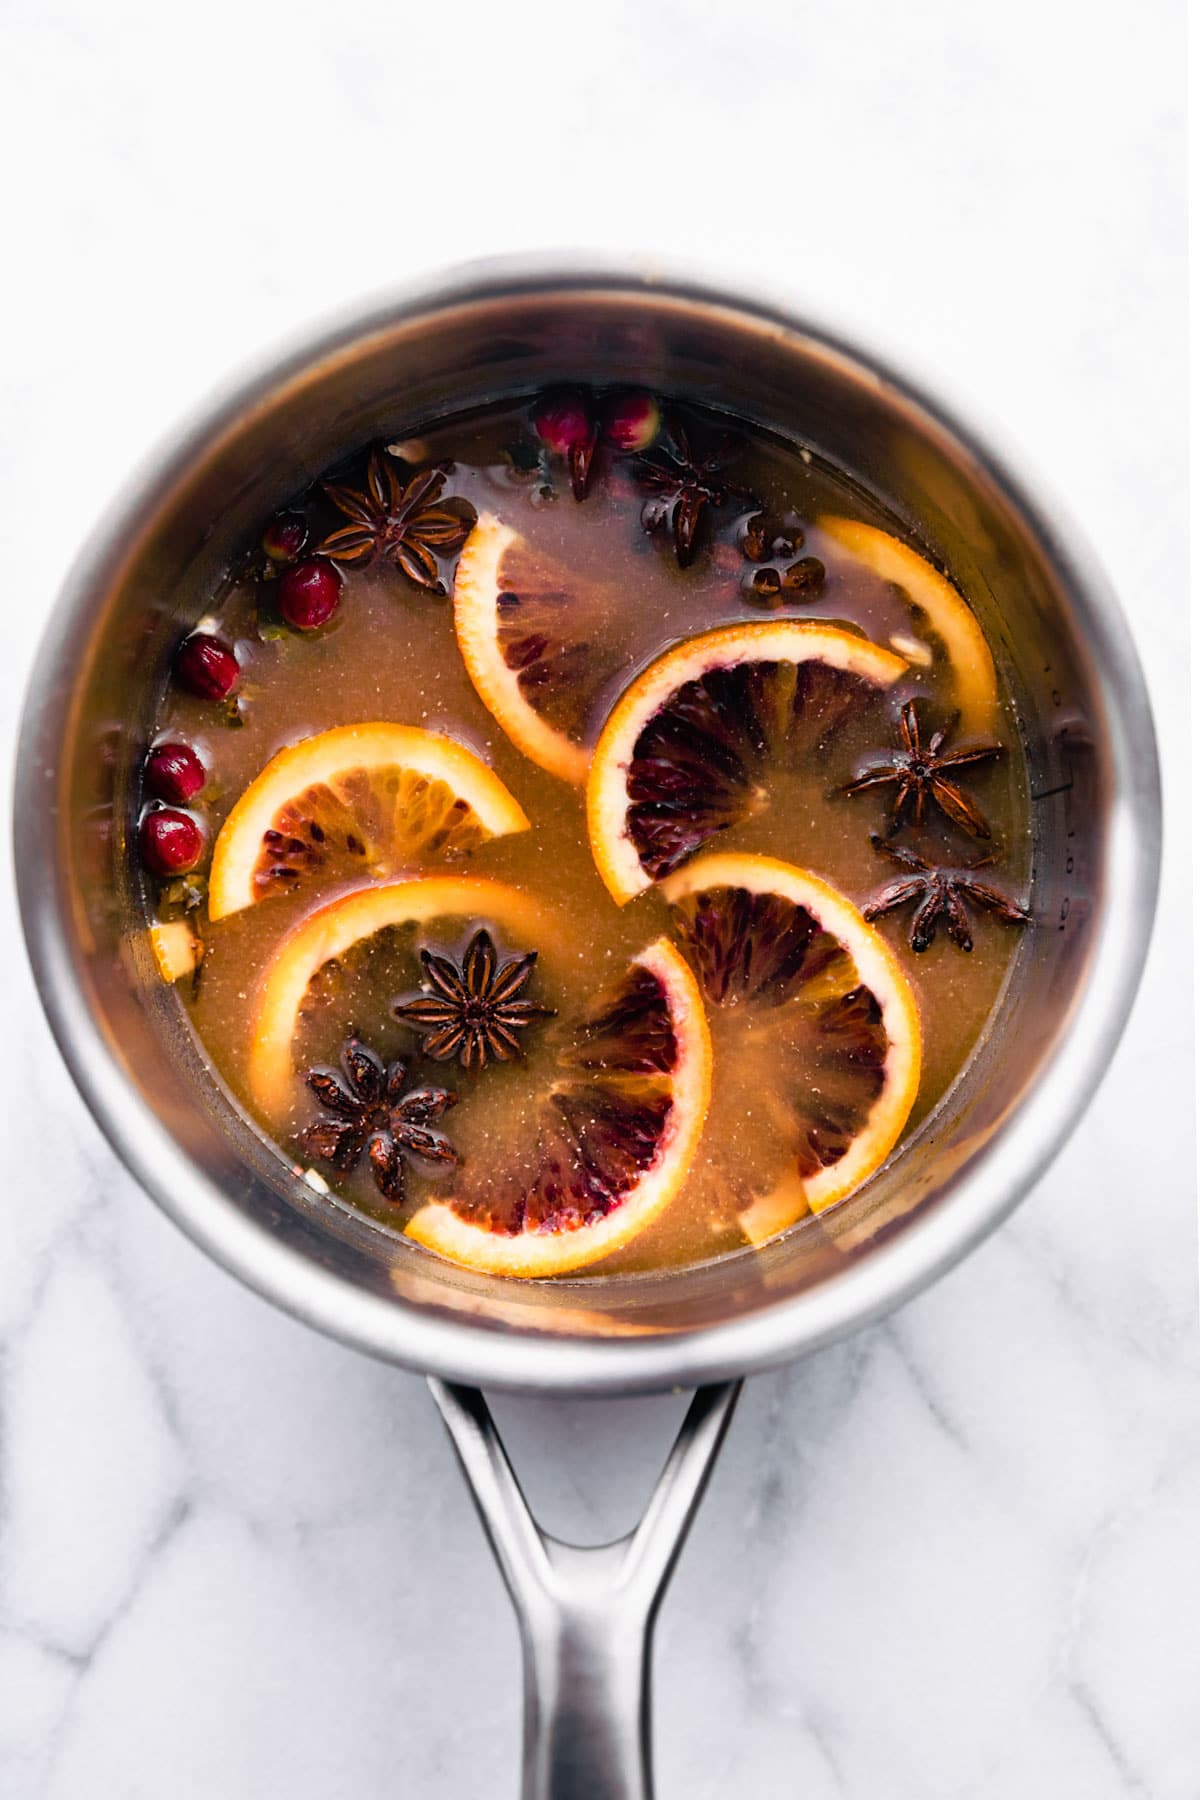 Overhead view hot toddy with spiced rum in silver saucepan with fresh cranberries, orange slices, and star anise floating in drink.